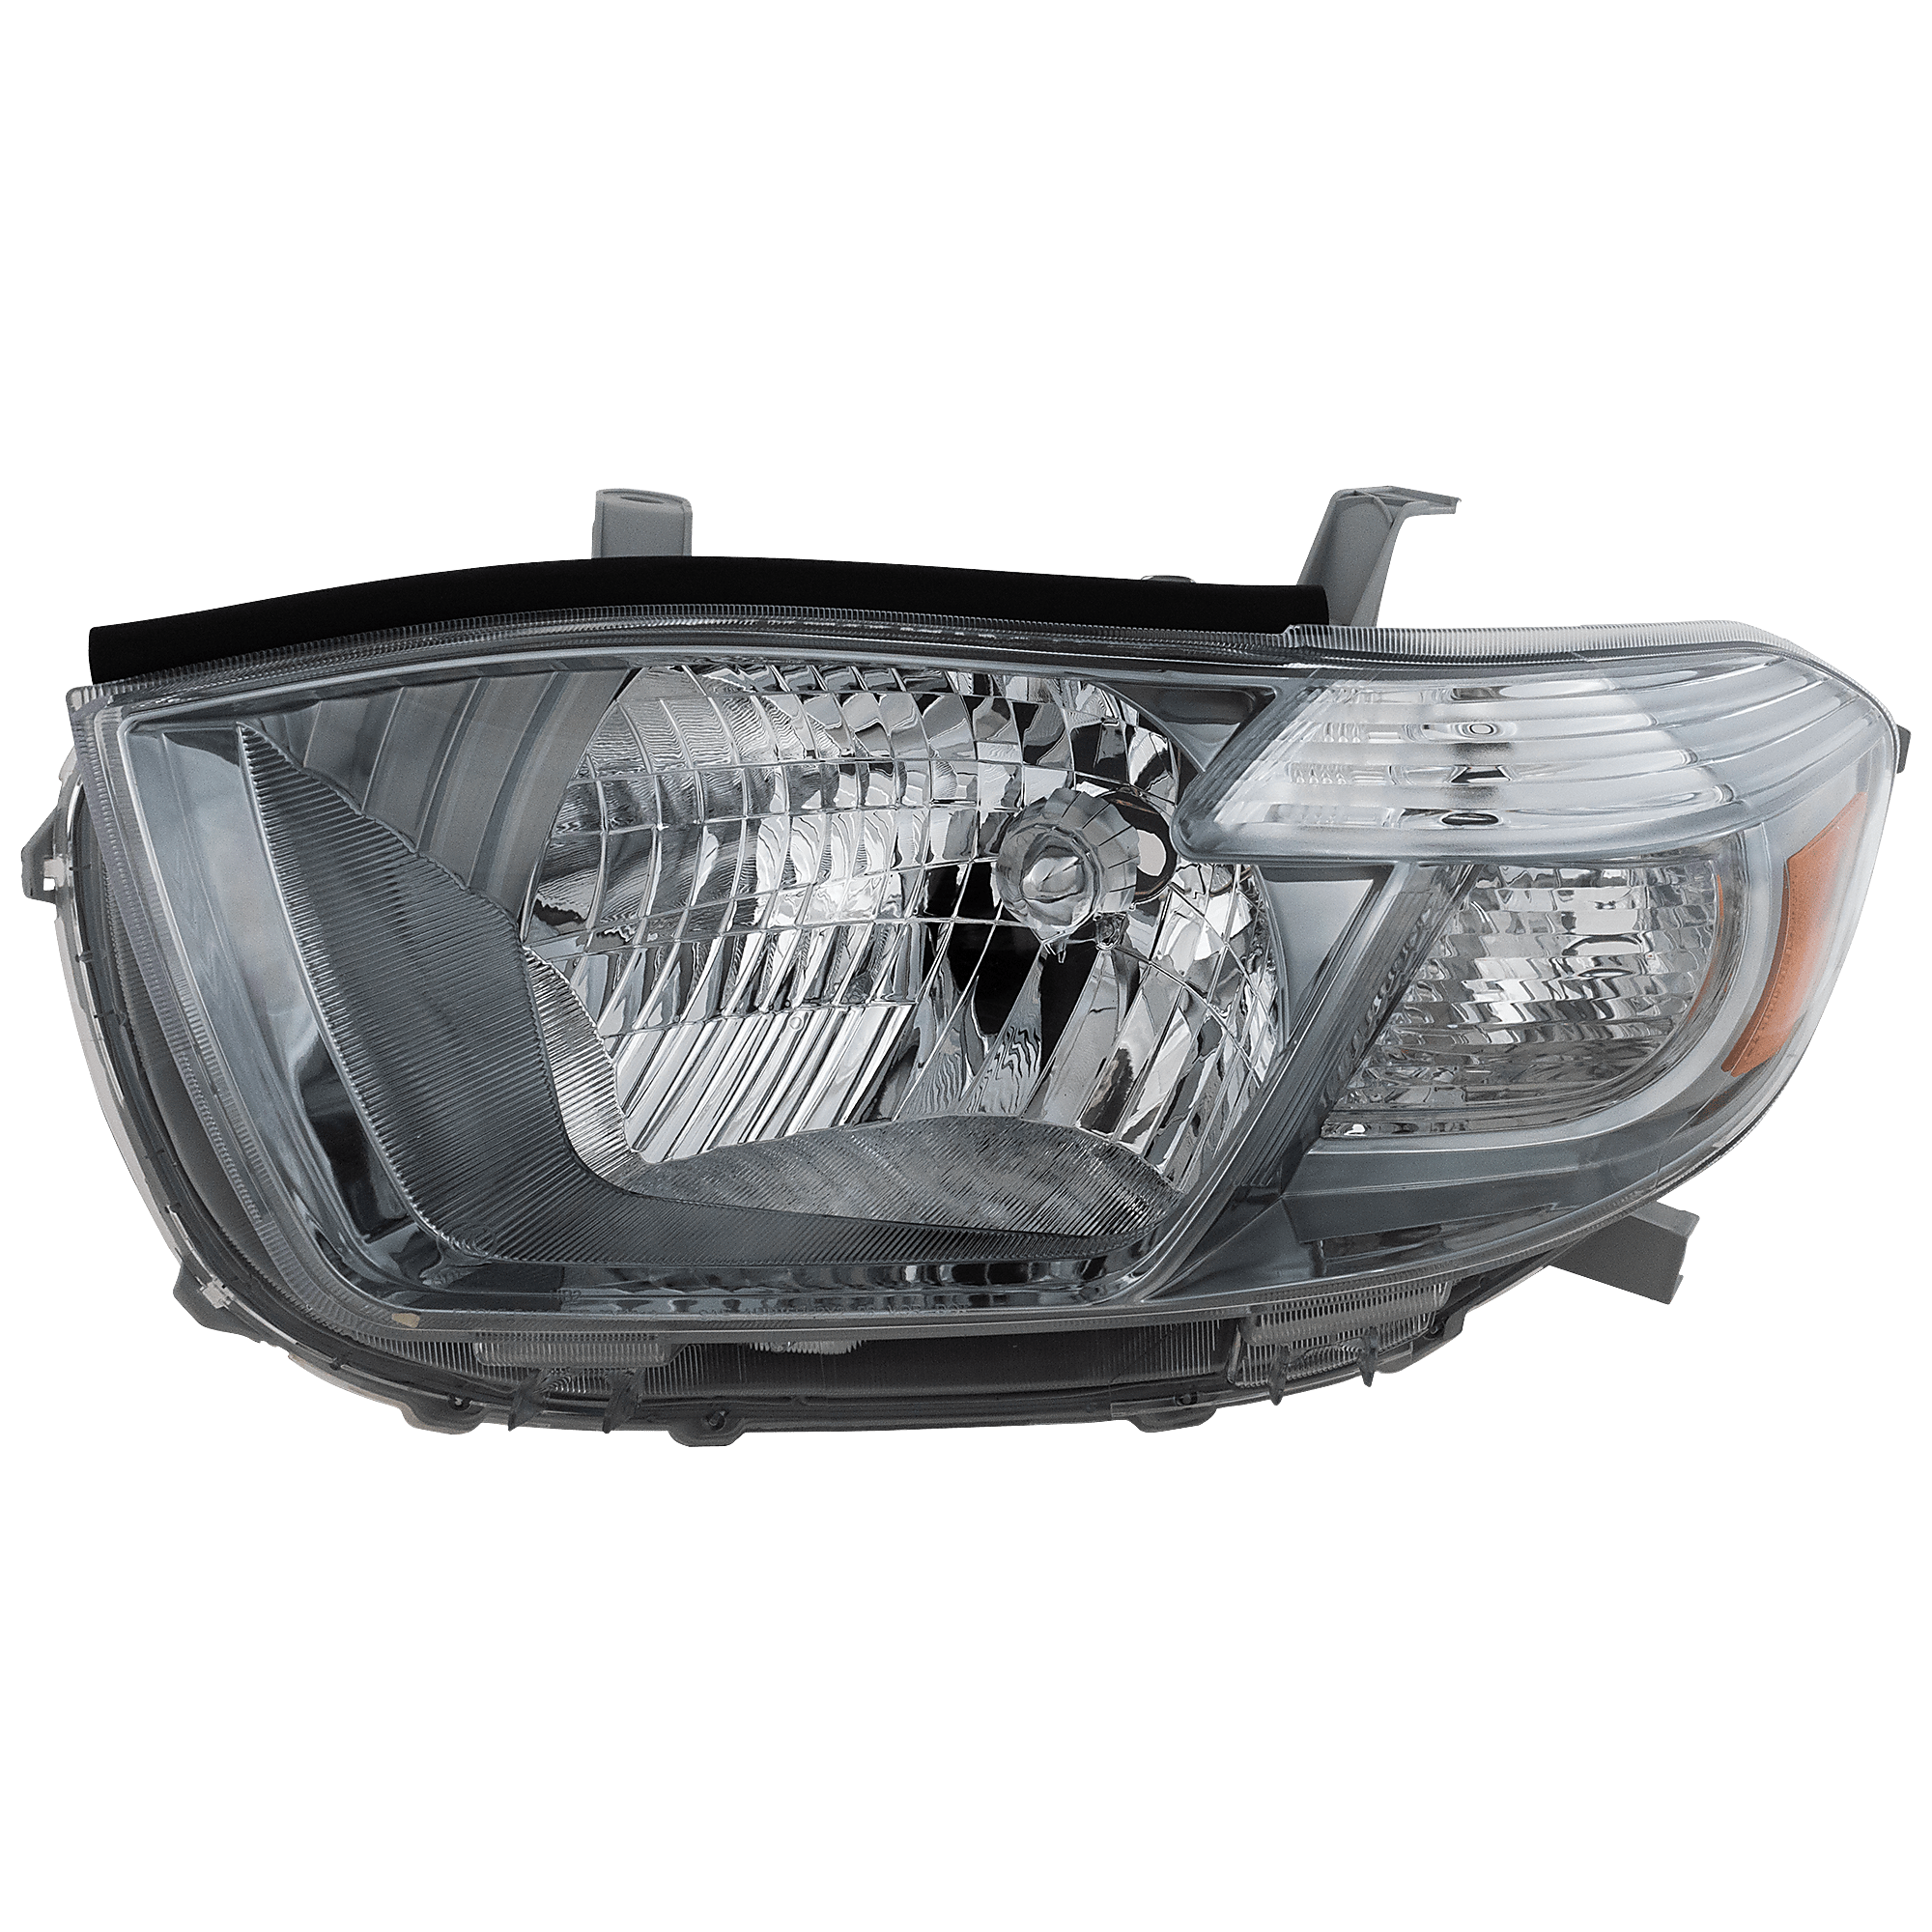 Details about   For 2008-2010 Toyota Highlander Headlight Assembly Set 96369NQ 2009